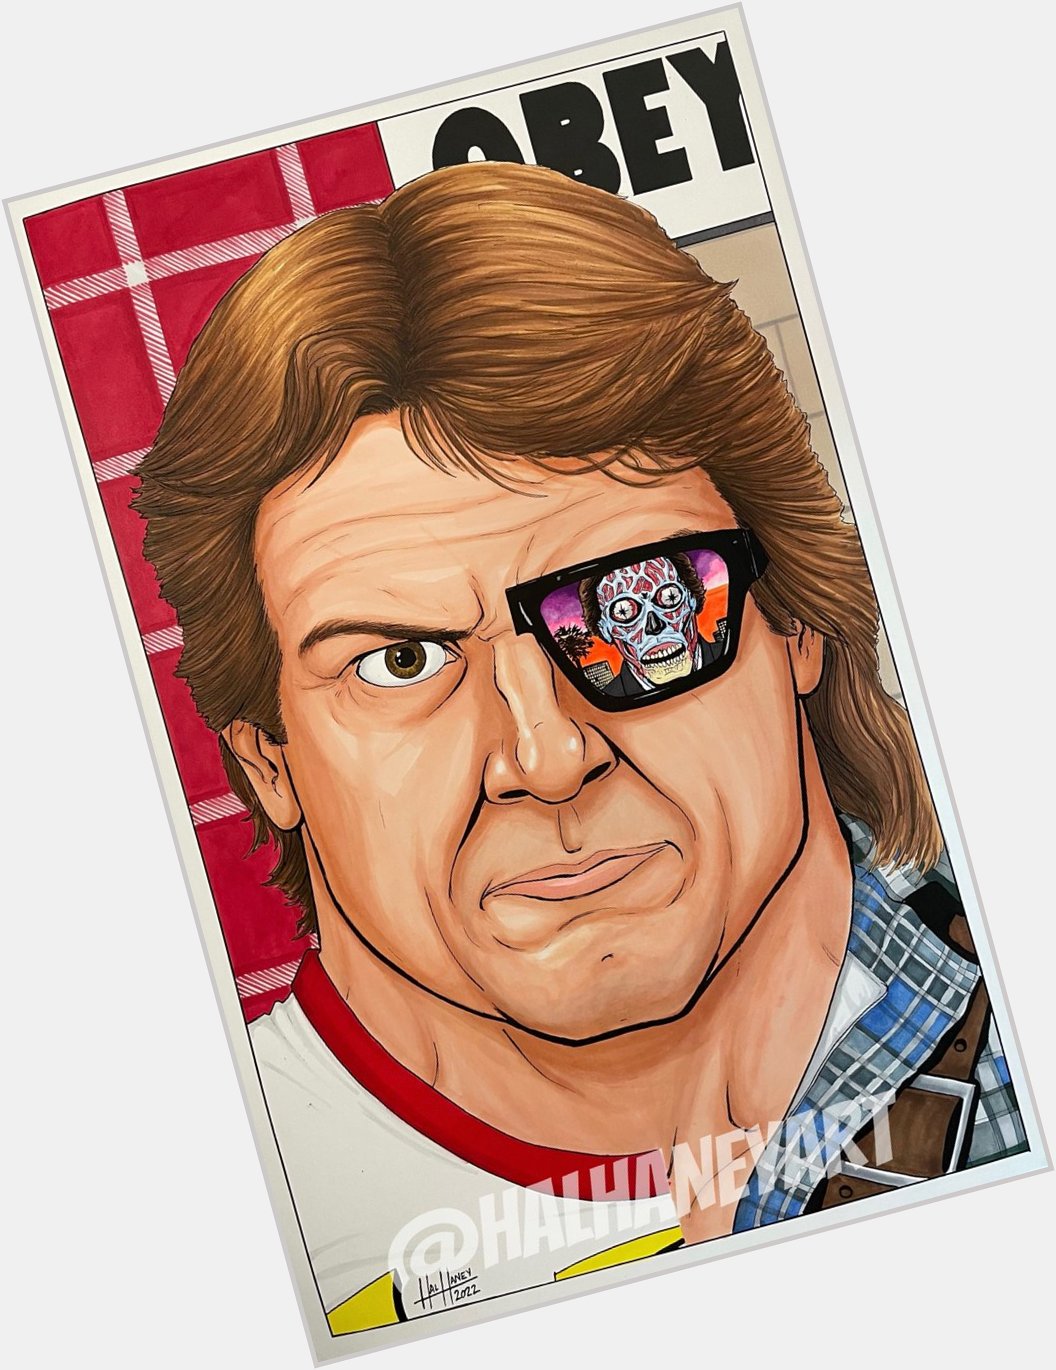 Happy birthday to one of the best wrestling characters of all time, Rowdy Roddy Piper.  